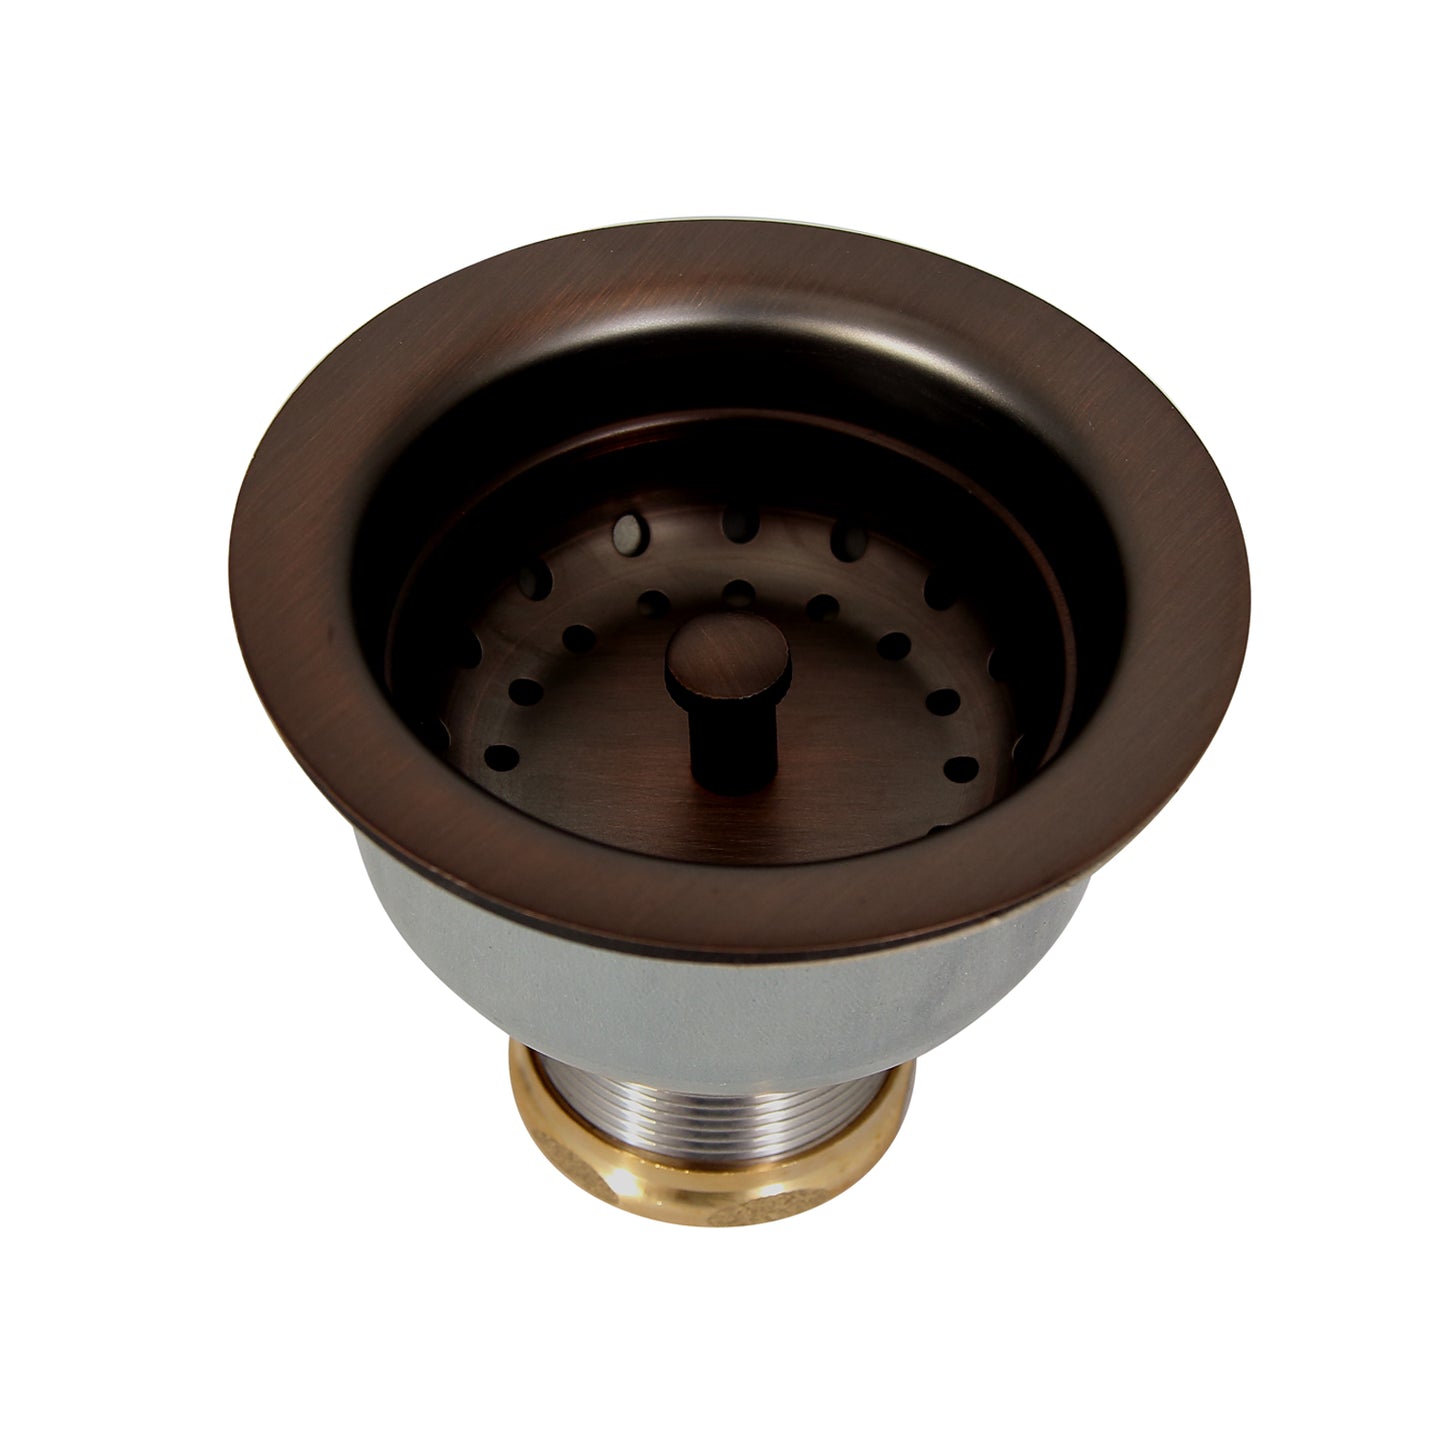 Kitchen Sink Strainer for 3-1/2" Drain with 3-1/2" Shank Oil Rubbed Bronze